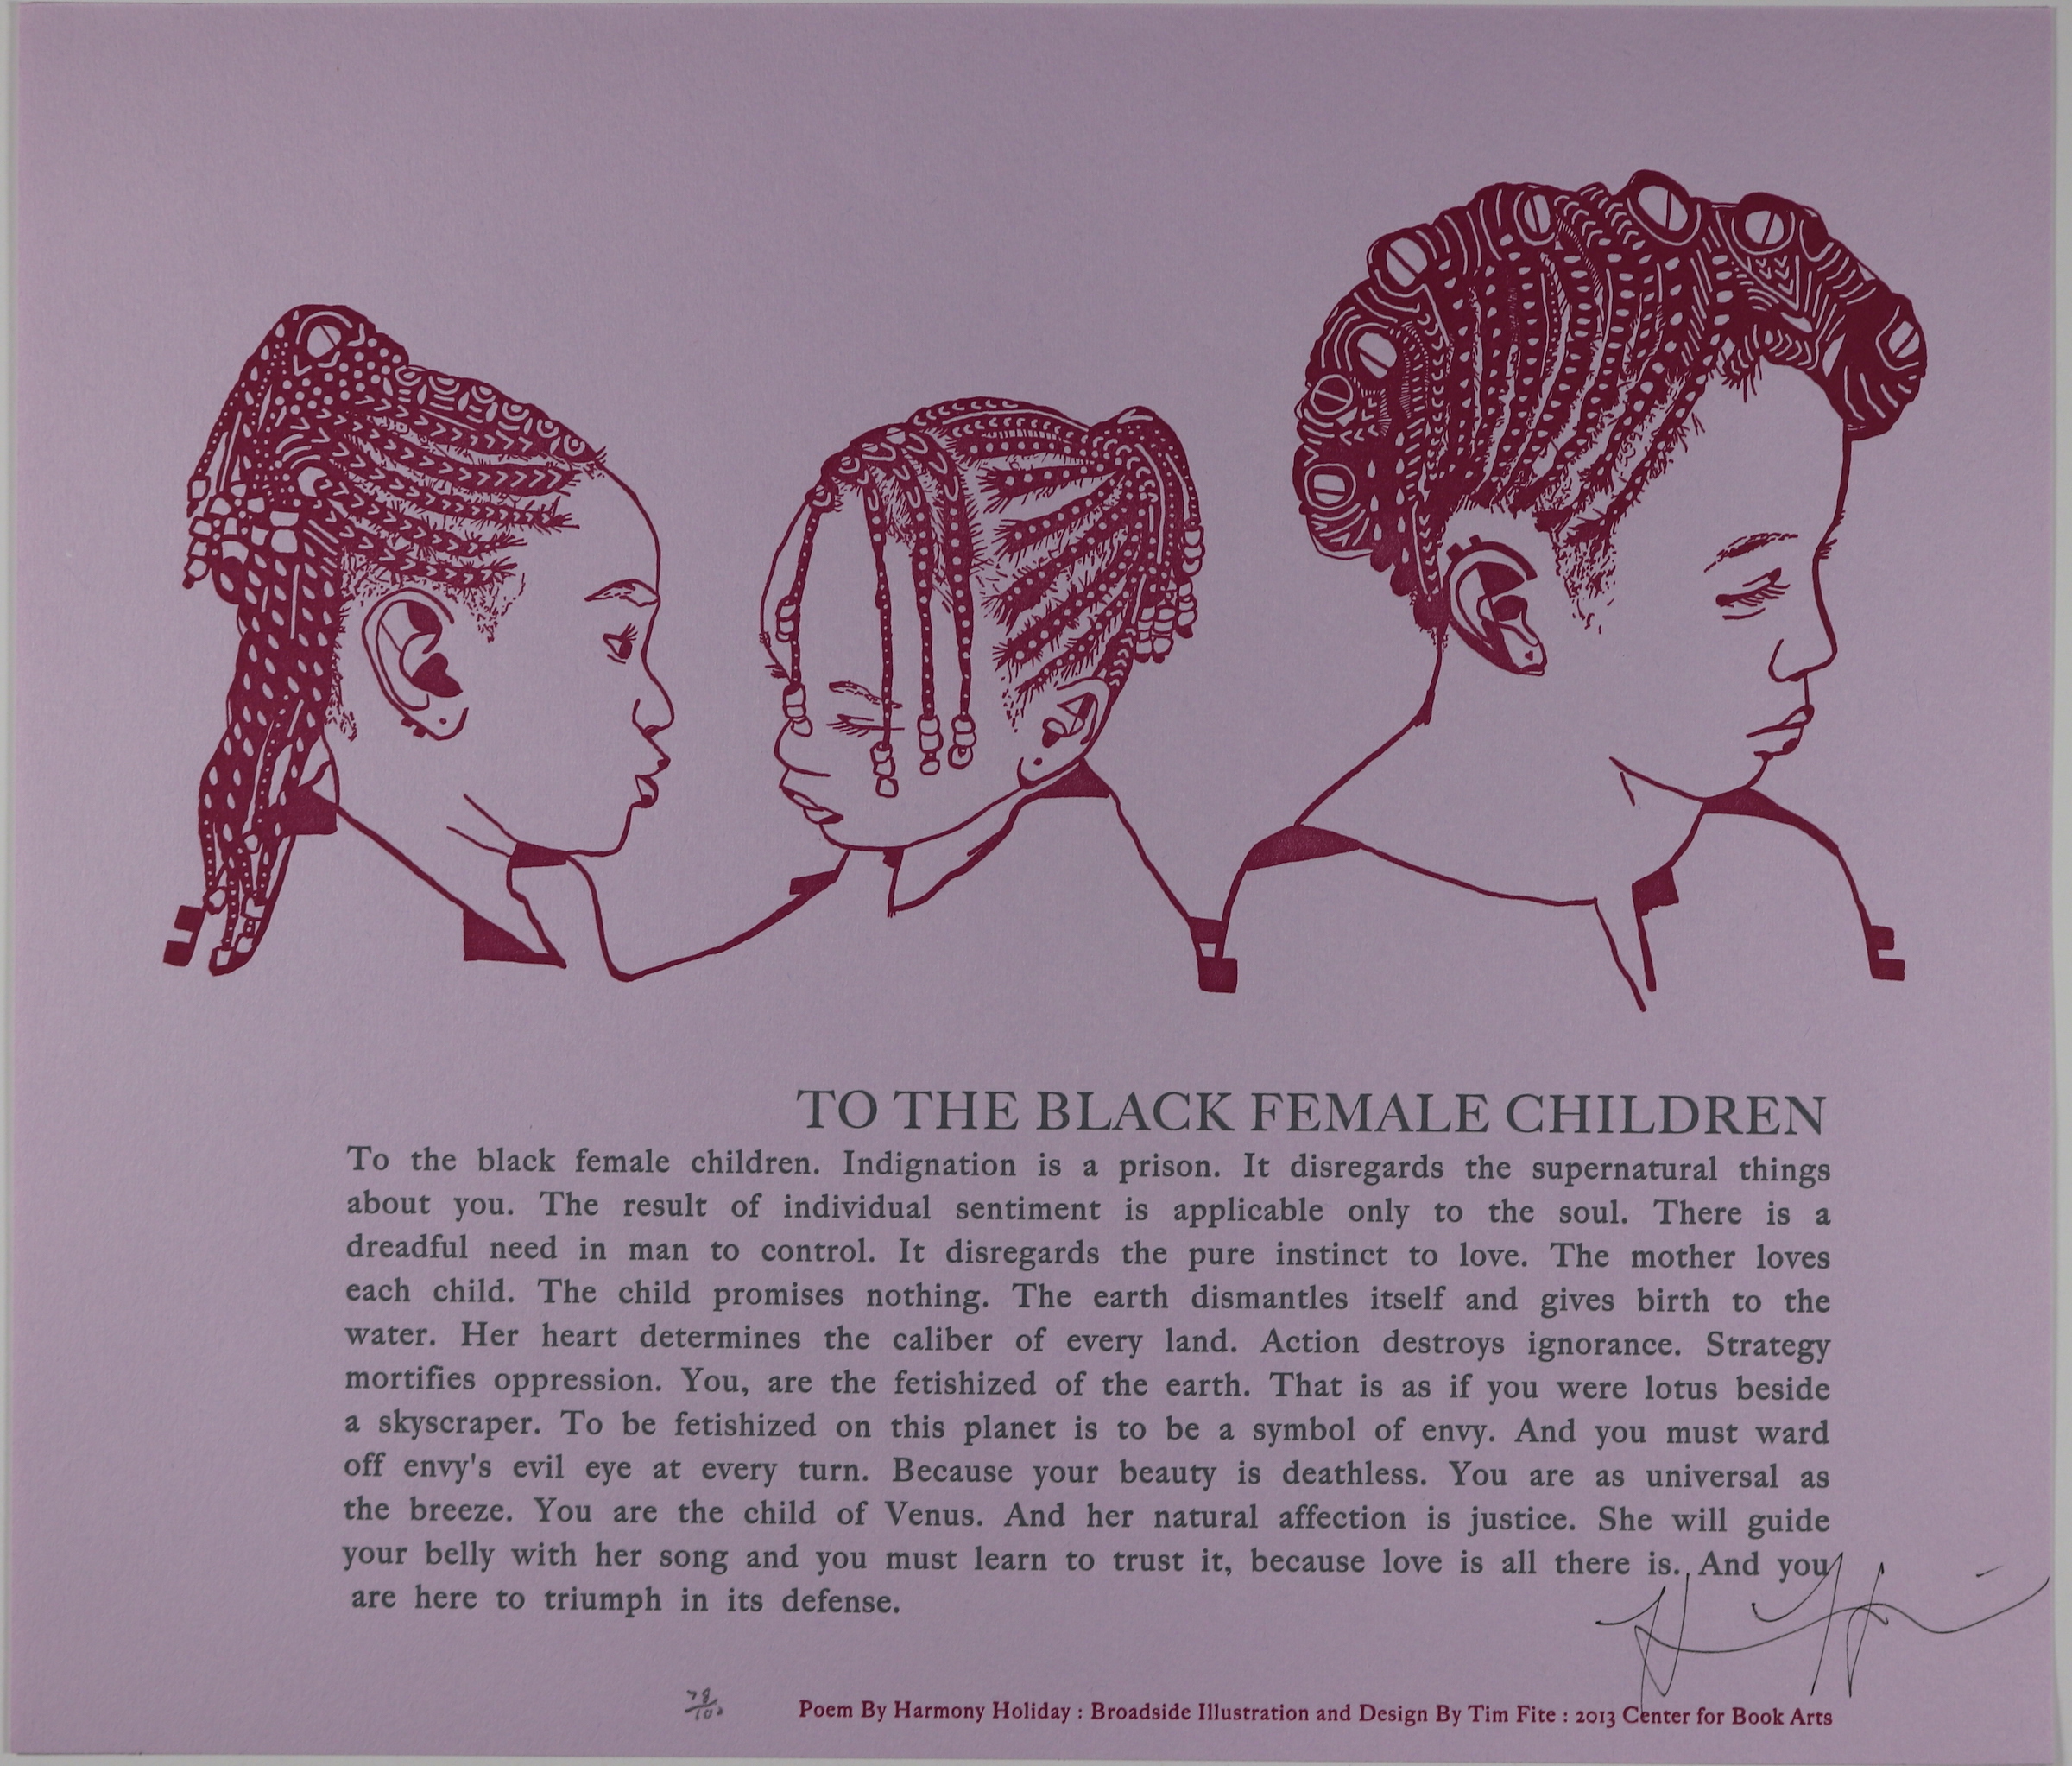 Broadside consists of a light purple background, the center focusing on the image of three young girls with different braided styles of hair. The bottom half of the broadside is the title with capital black letters and below the passage/poem formatted into a large paragraph.